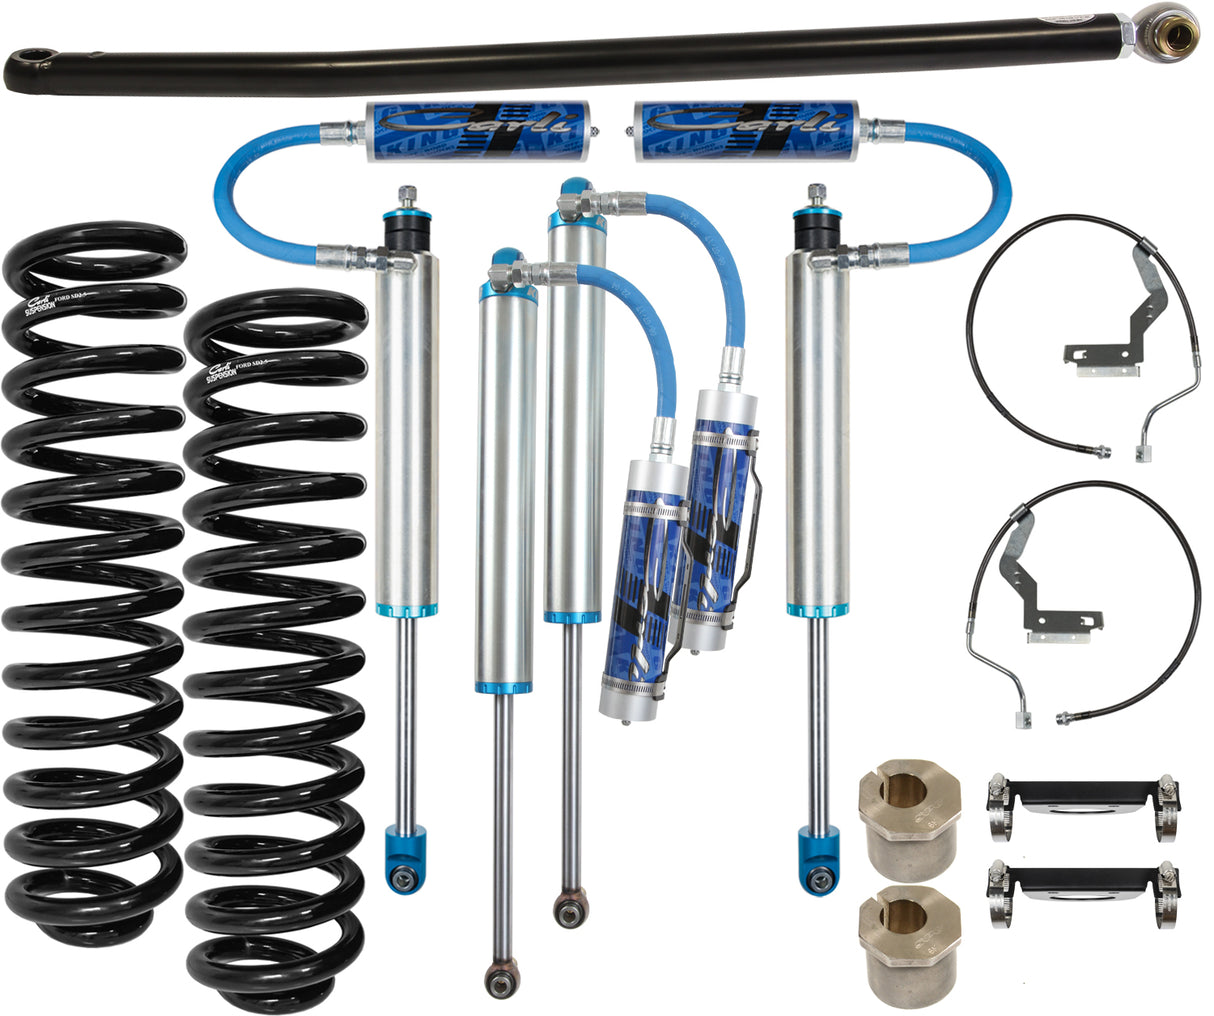 Pintop System - Our most popular system, the Pintop kit boasts 2.5″, Remote Reservoir King Shocks. Designed and tuned in house for the customer looking for substantial on-road and off-road performance improvement. Customers can expect more control and bottom-out resistance than the Back-Country.